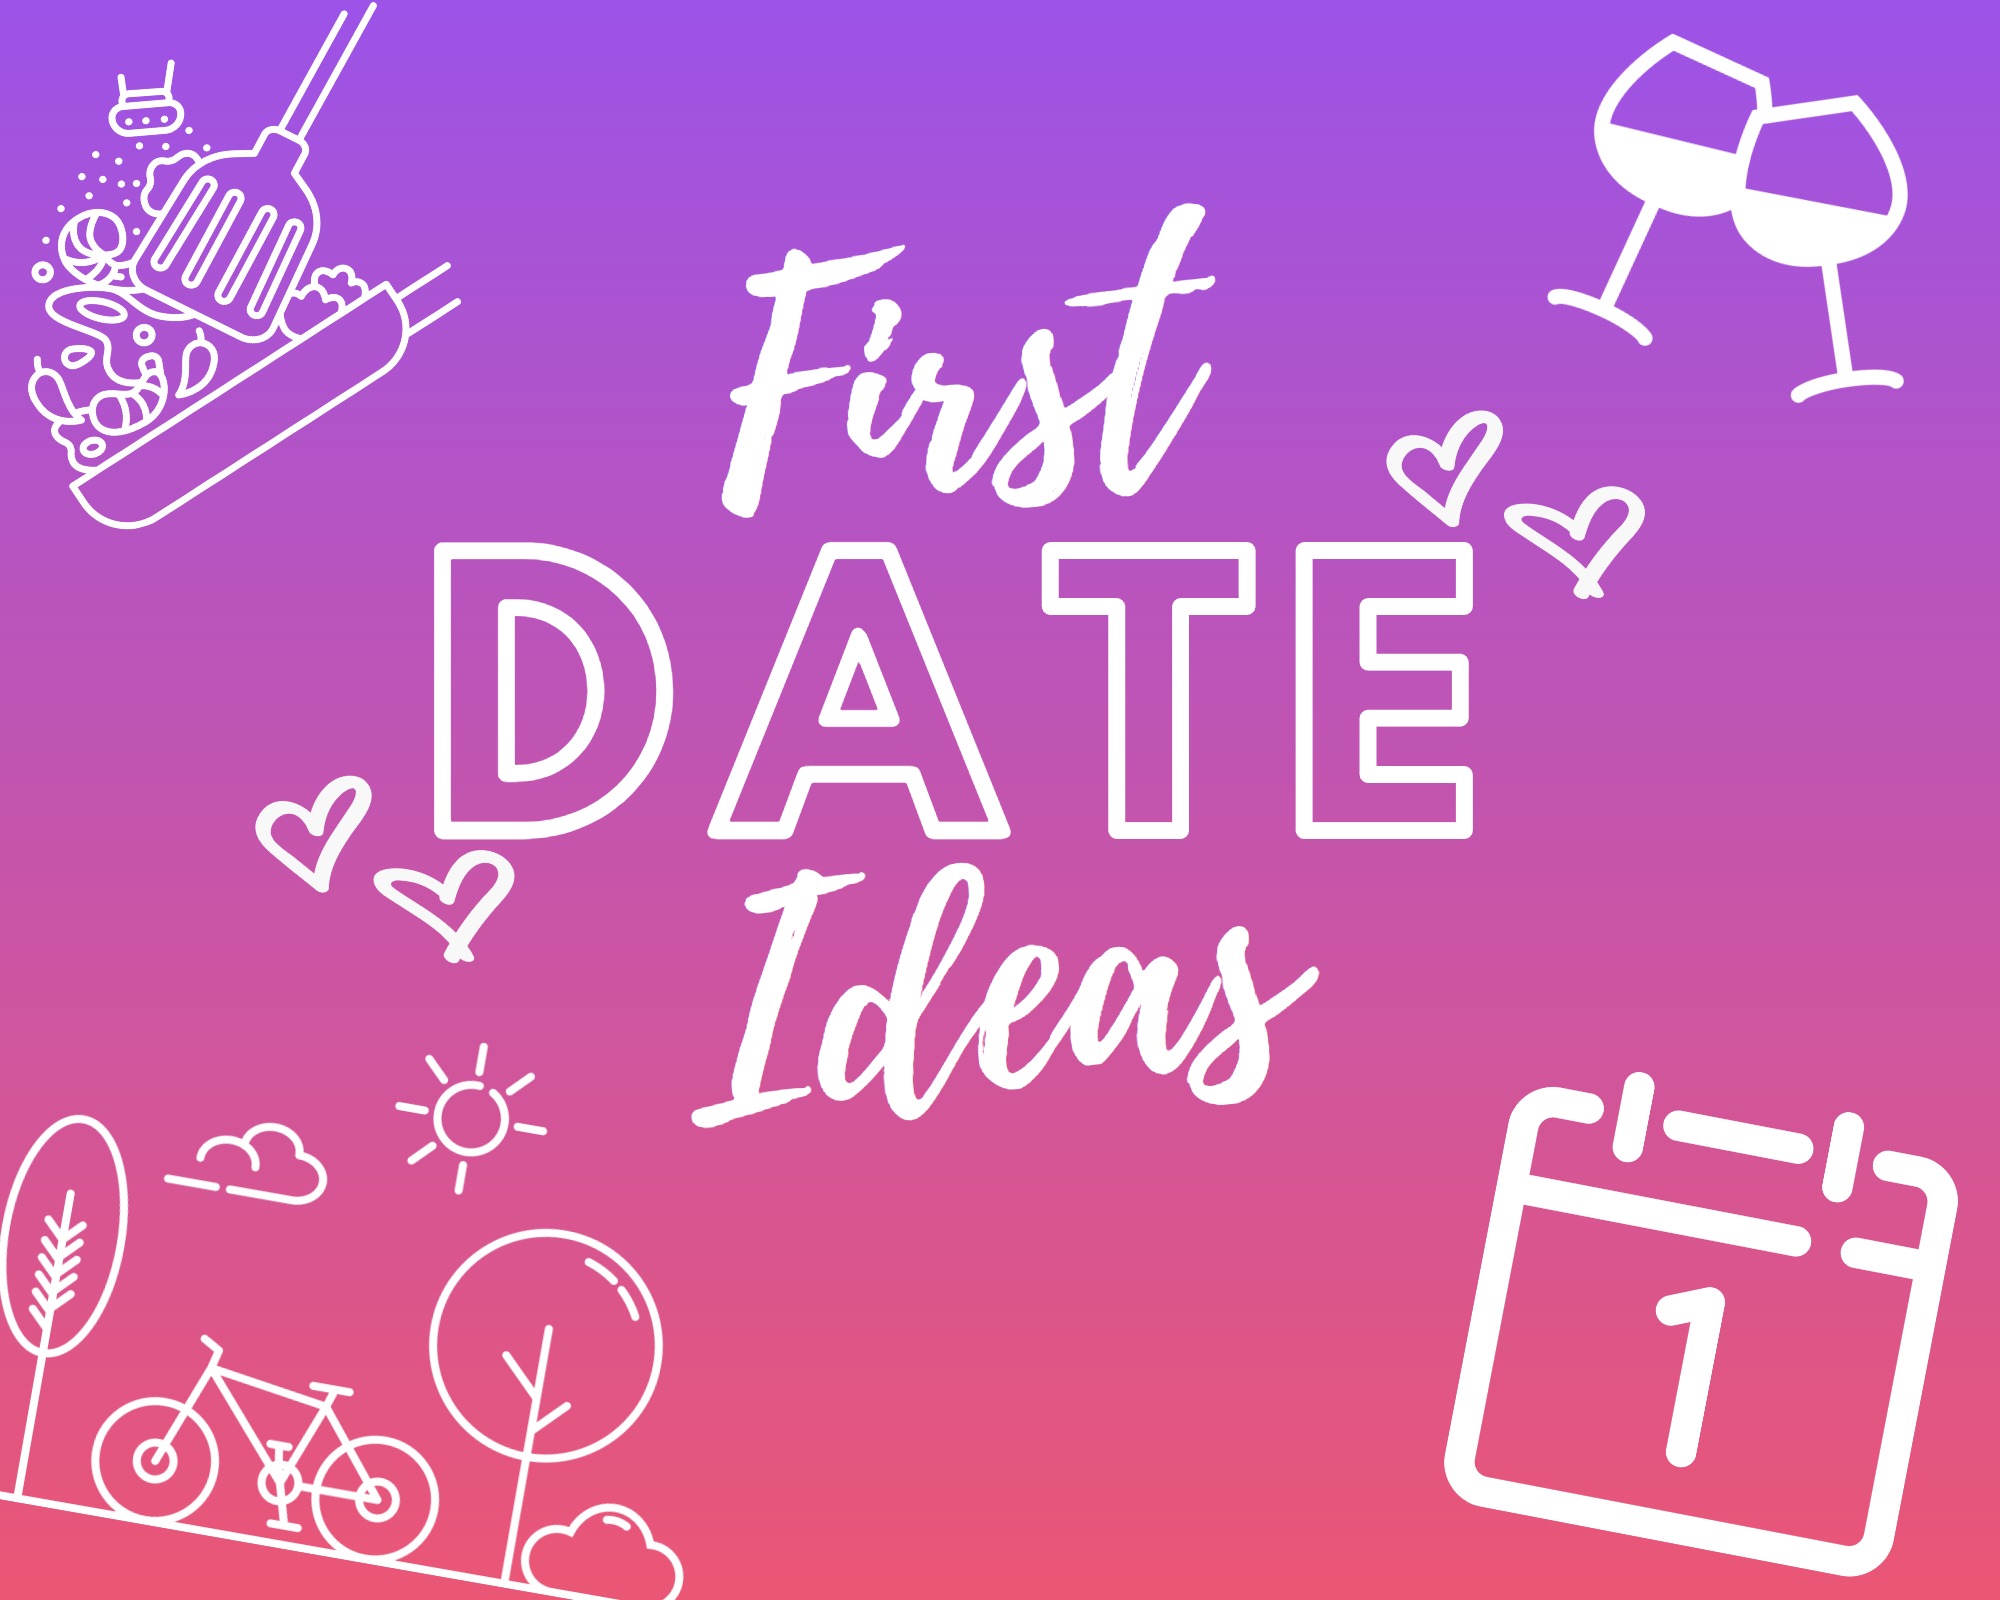 First Date Ideas, Great Ways to Spend a First Date - Thrissle